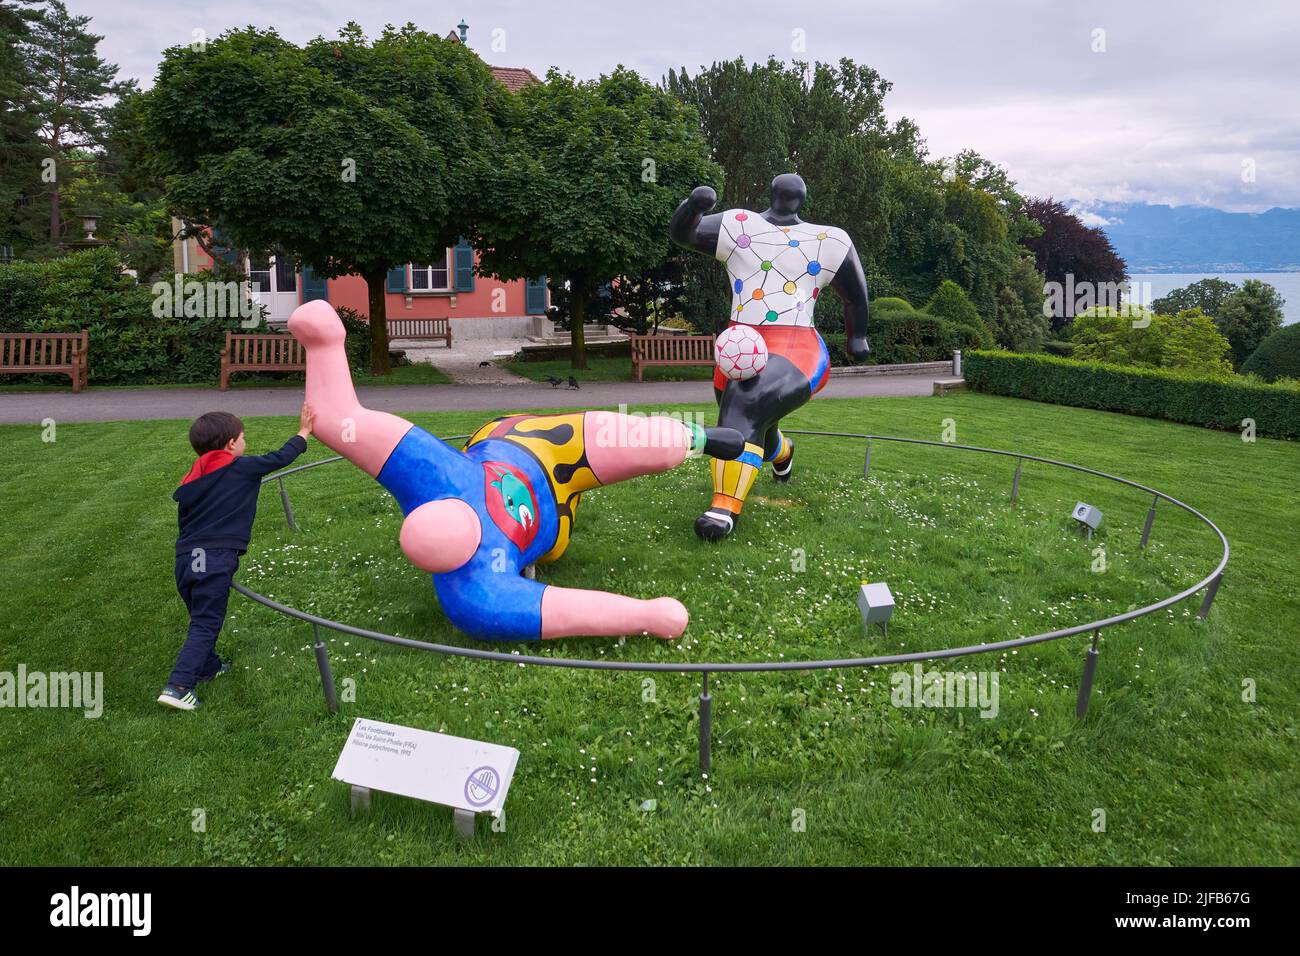 Switzerland, canton of Vaud, Lausanne, the Olympic museum in the district of Ouchy on the shores of Geneva Lake, the statue of the football players of Nikki de Saint Phalle in the garden Stock Photo